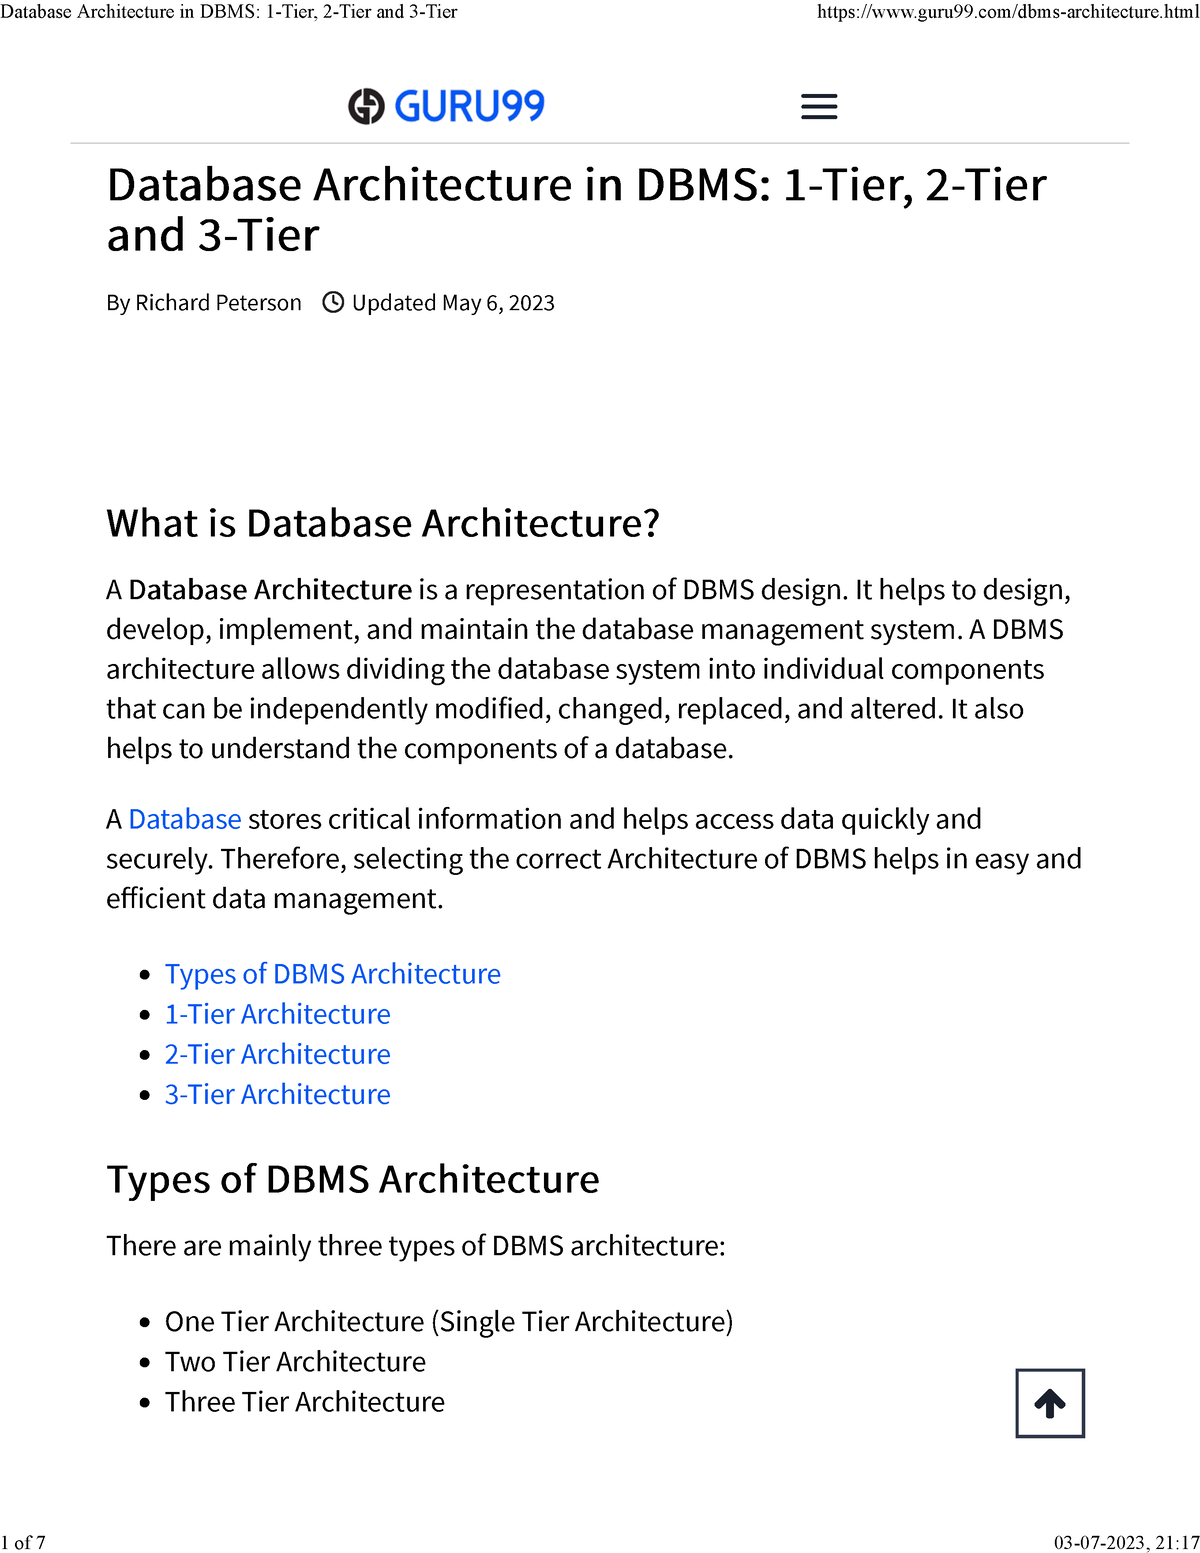 Database Architecture in DBMS: 1-Tier, 2-Tier and 3-Tier